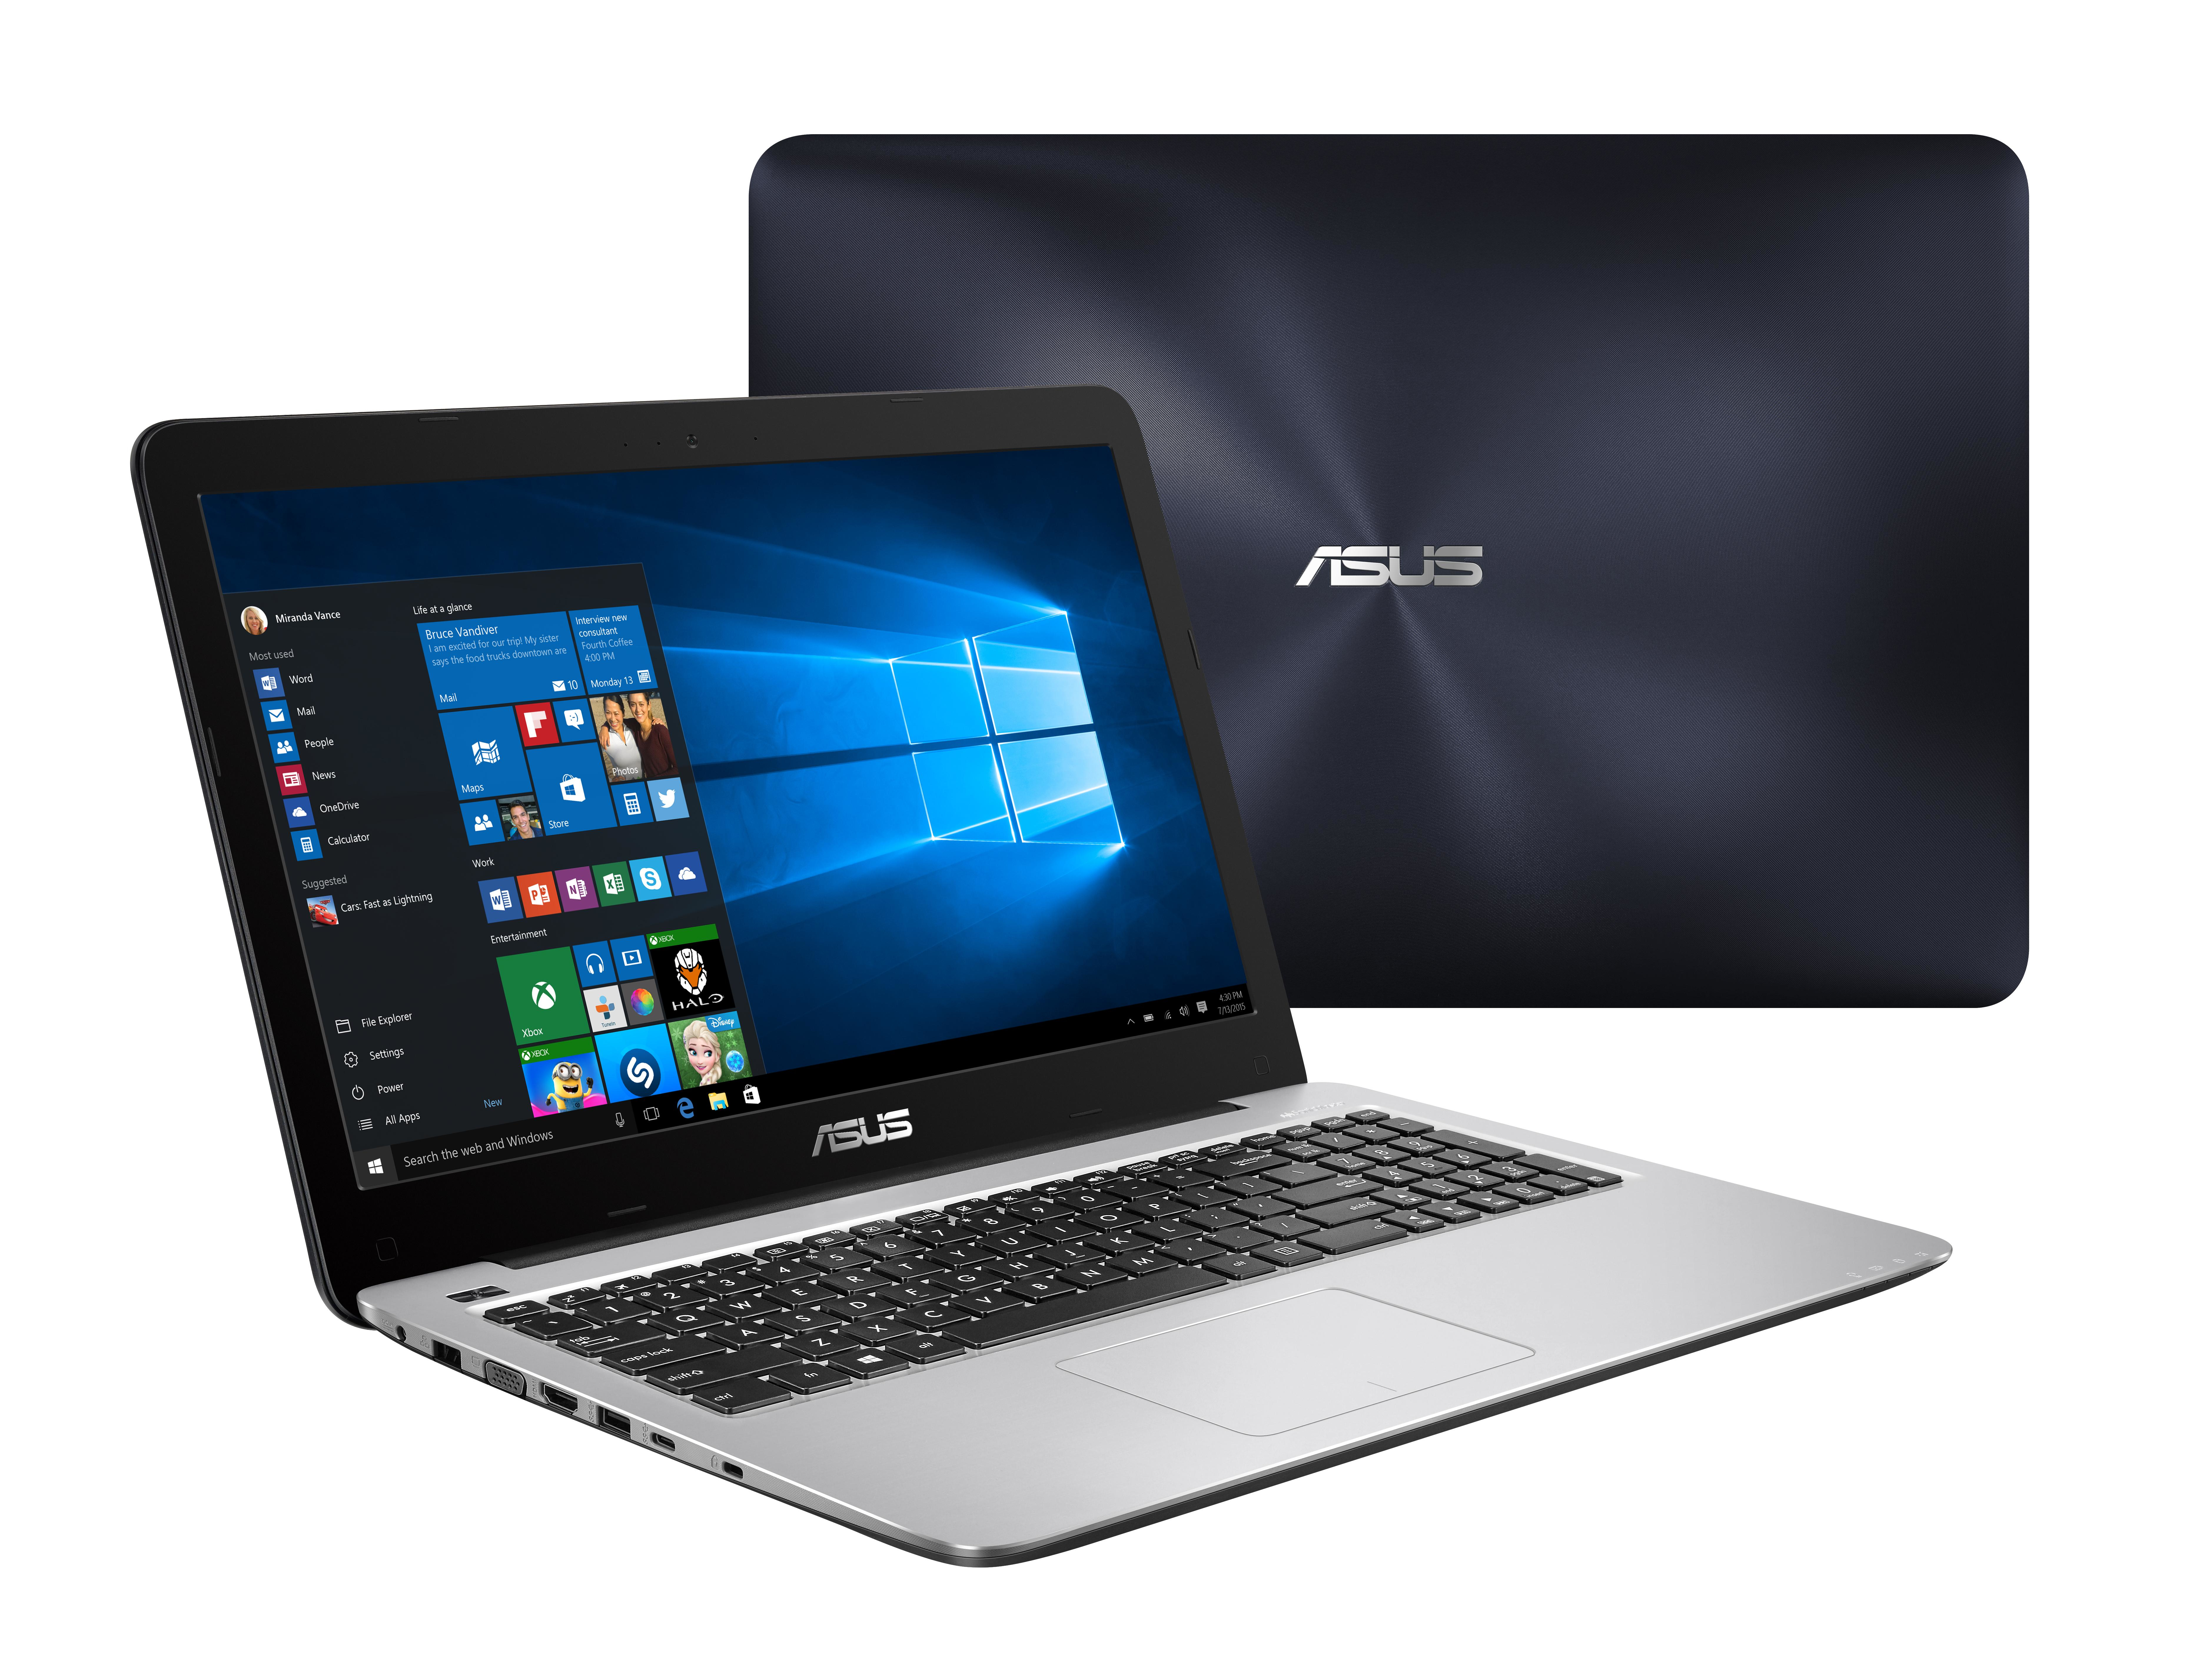 ASUS VivoBook X556 15.6" 8GB i3 i3-6100U 128GB SSD 940M Gaming Laptop - Picture 1 of 1